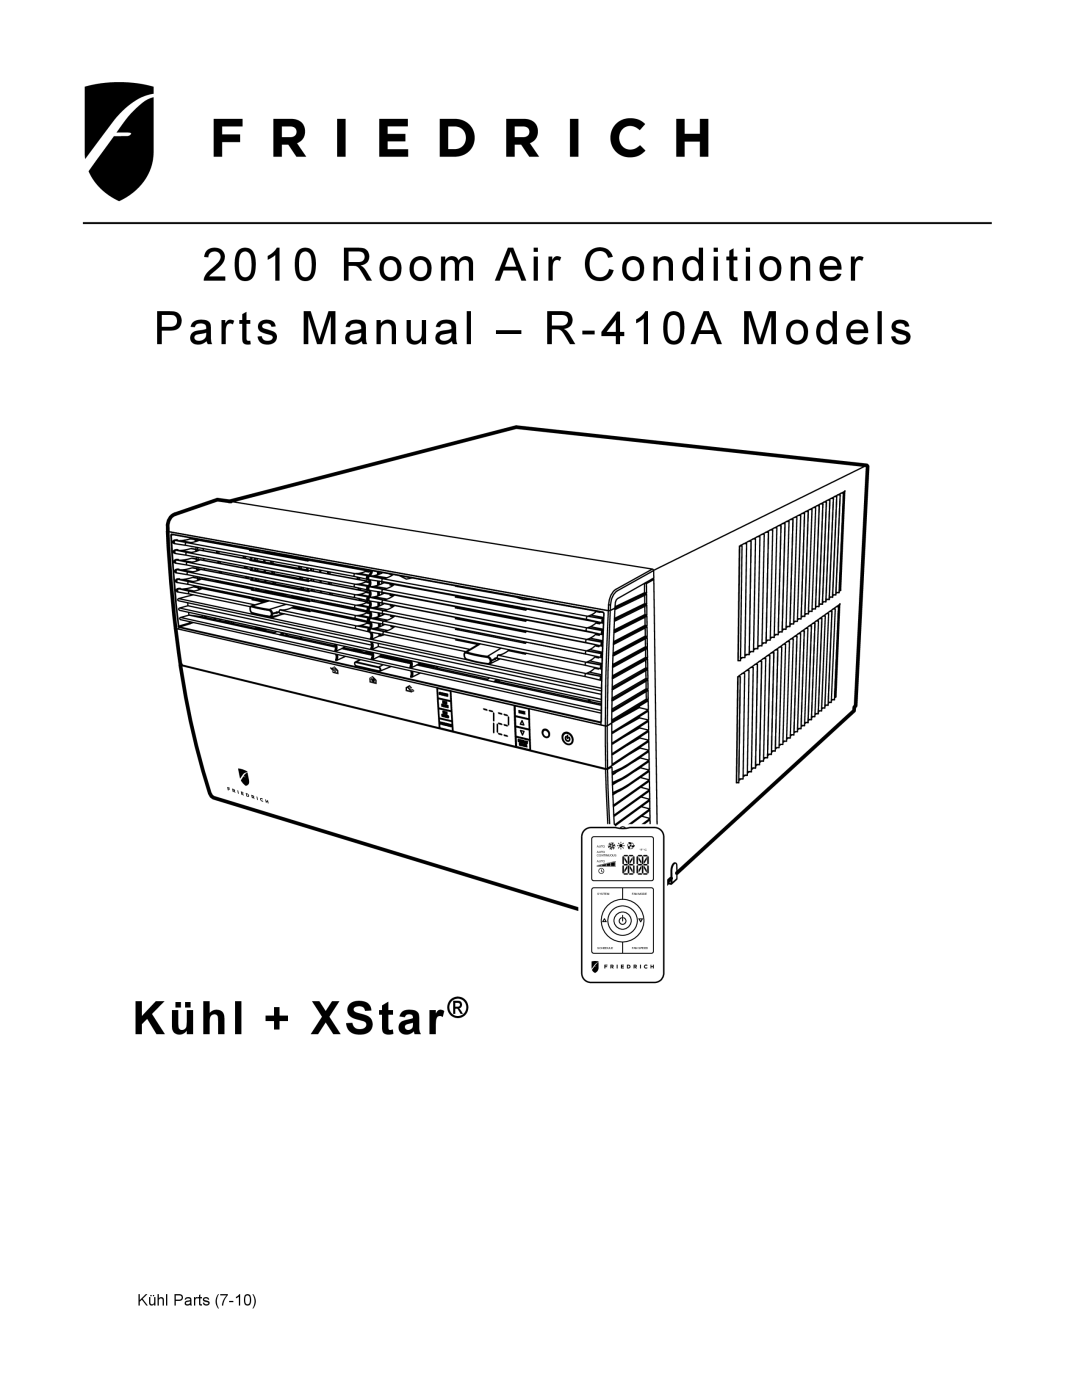 Friedrich service manual Standard Chassis R-410AModels, Room Air Conditioners, Service Manual, Cool Only 